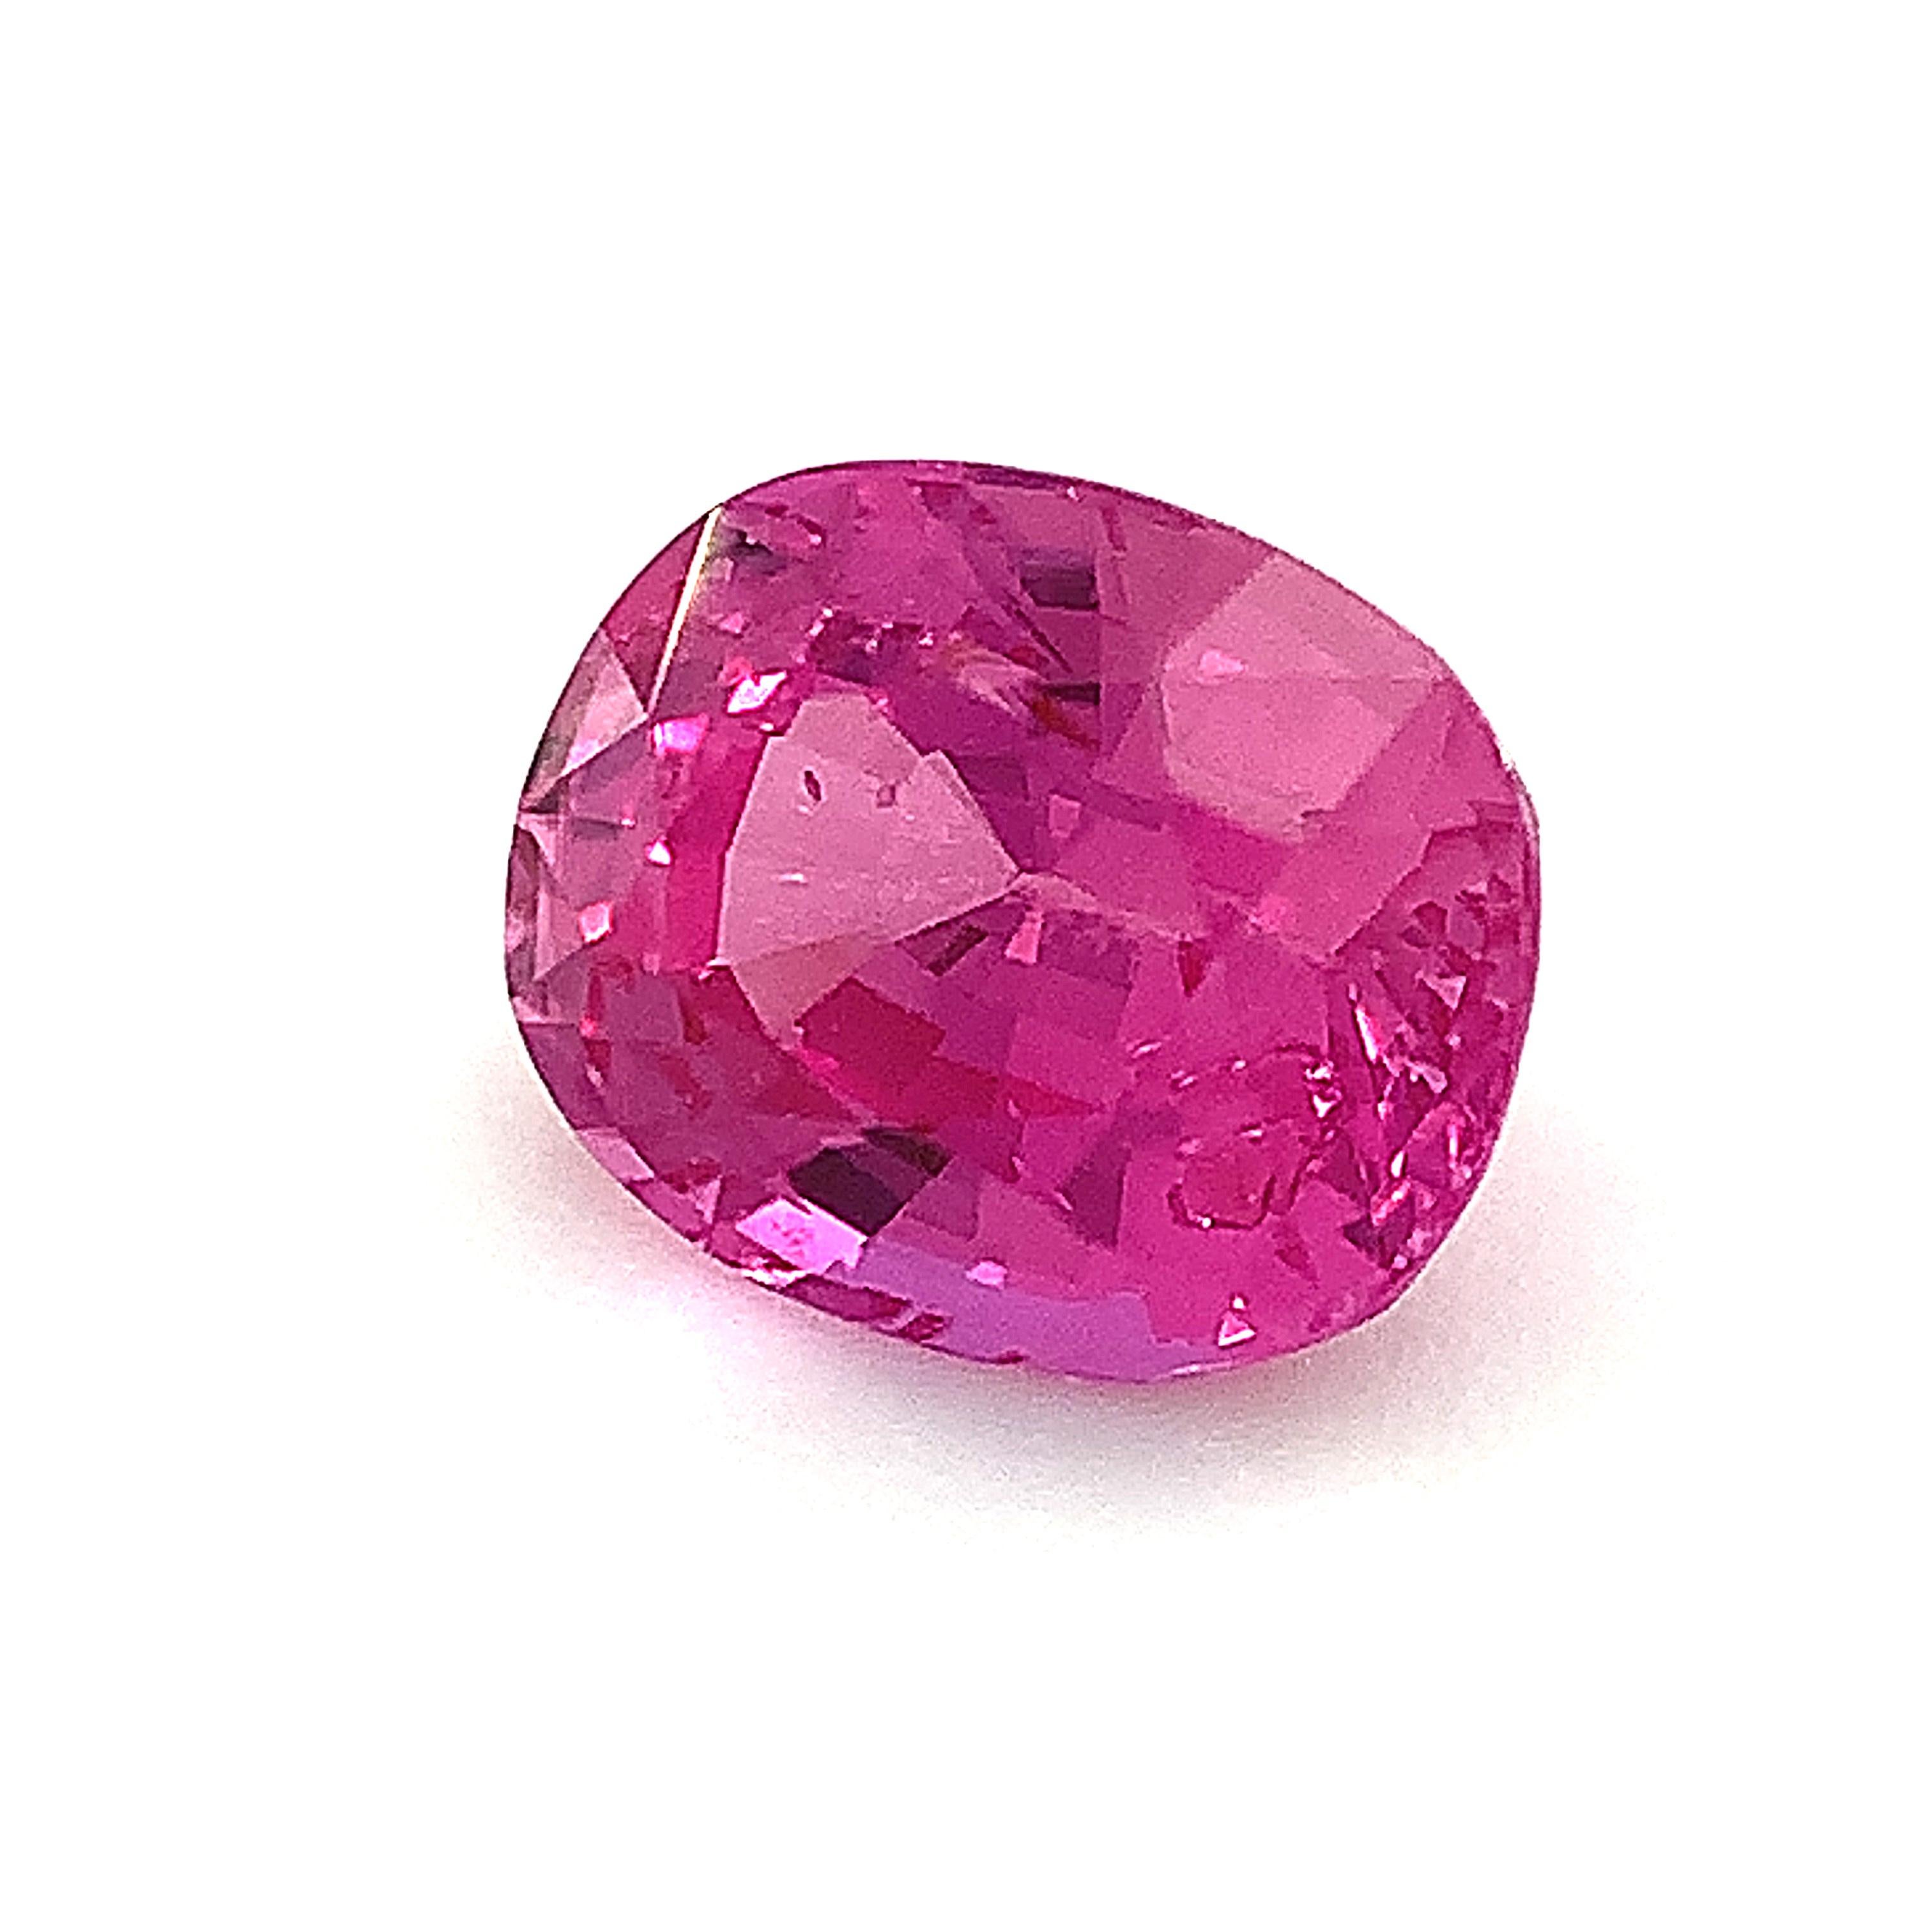 Unheated 1.39 Carat Burmese Pink Sapphire, Unset Loose Gemstone, GIA Certified For Sale 2